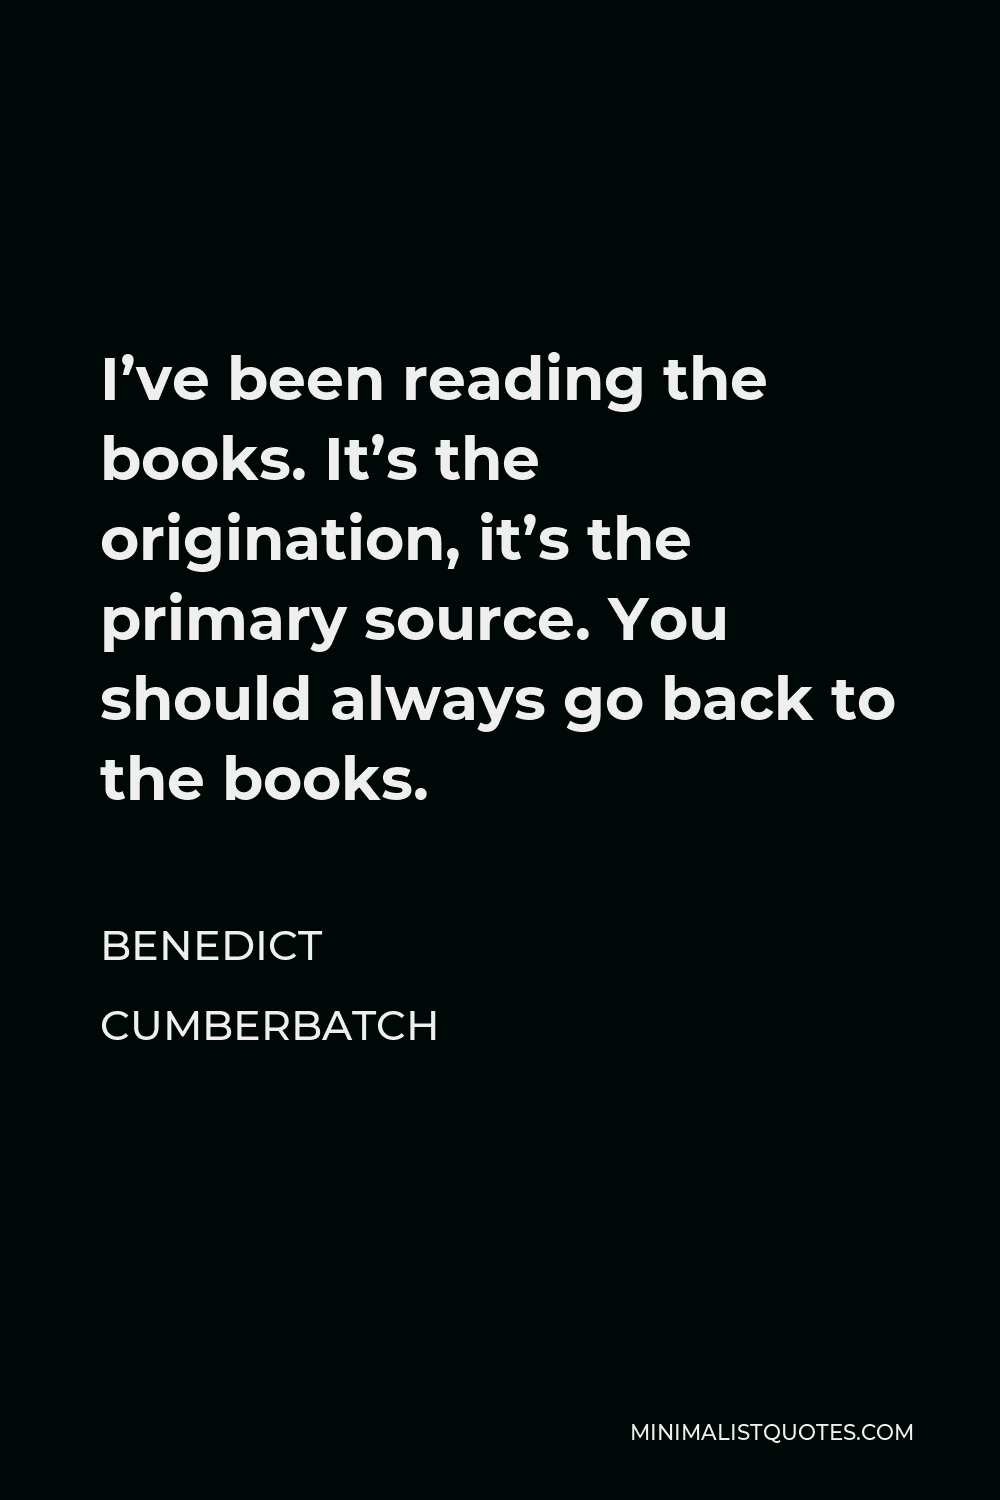 Benedict Cumberbatch Quote - I’ve been reading the books. It’s the origination, it’s the primary source. You should always go back to the books.